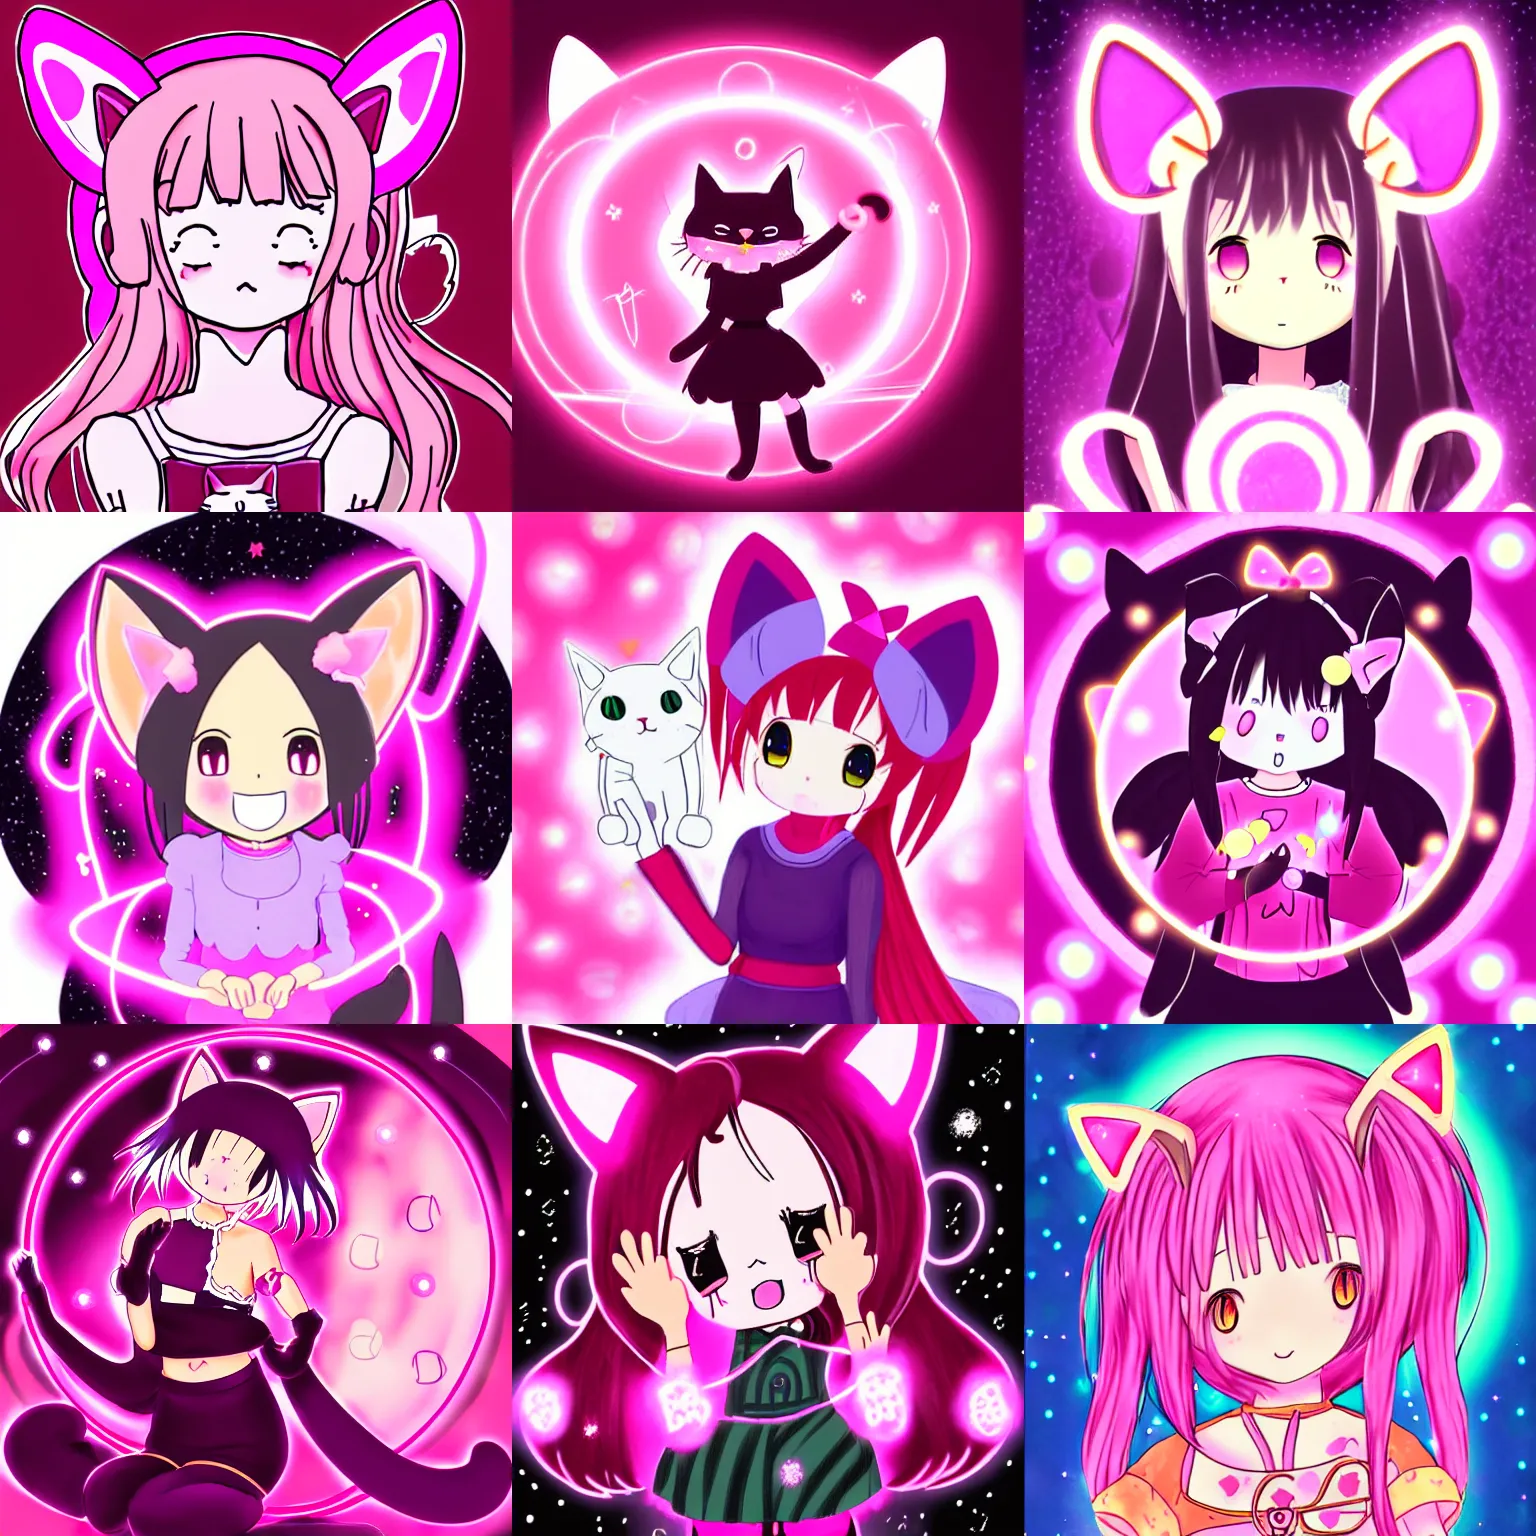 Prompt: card art of happy anime (cat) girl girl with cat ears drawing magic circles. Glow with magic. Pink hue.